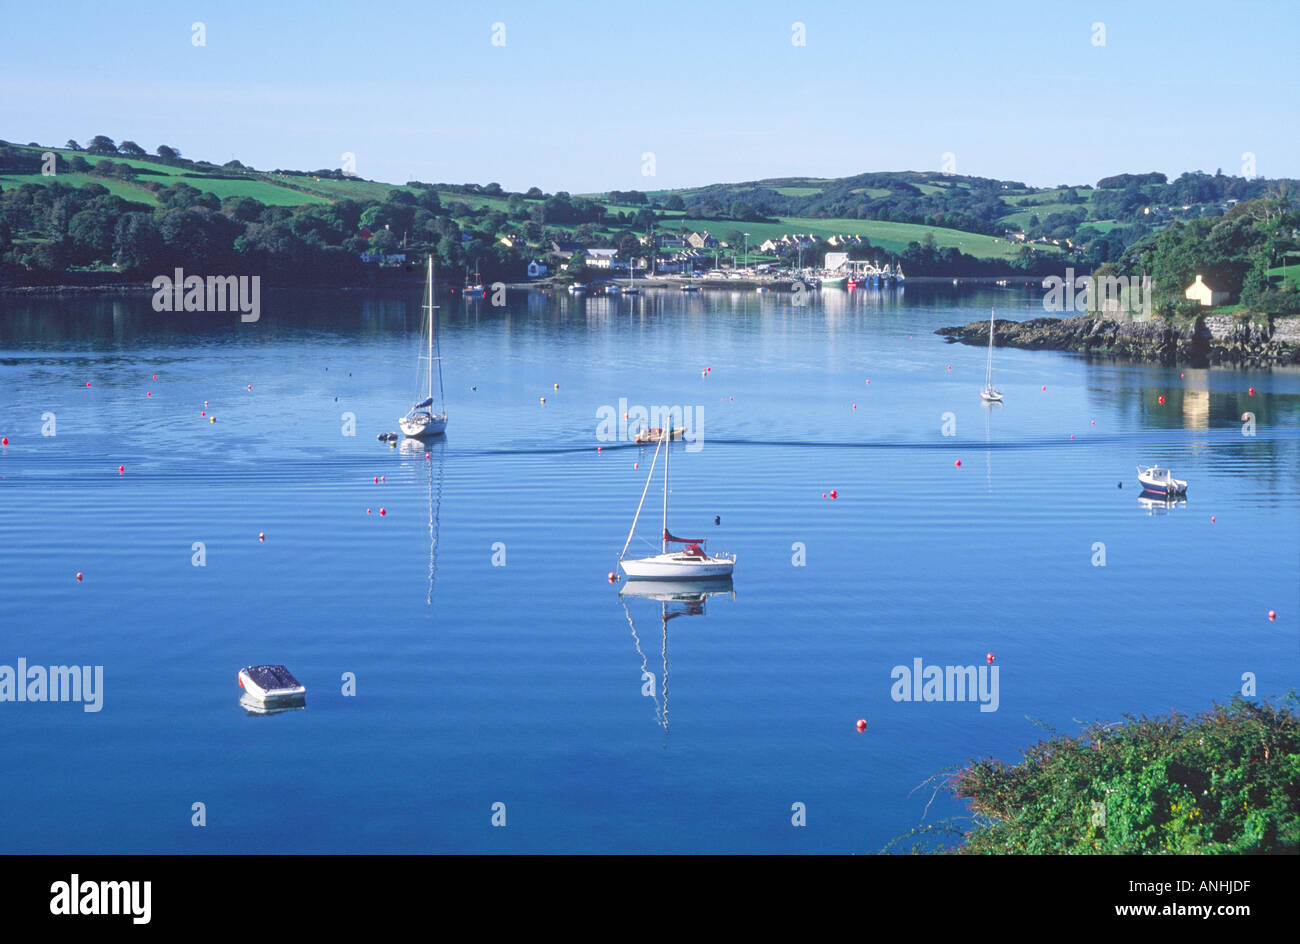 Yachts with Union Hall in background County Cork Ireland Stock Photo